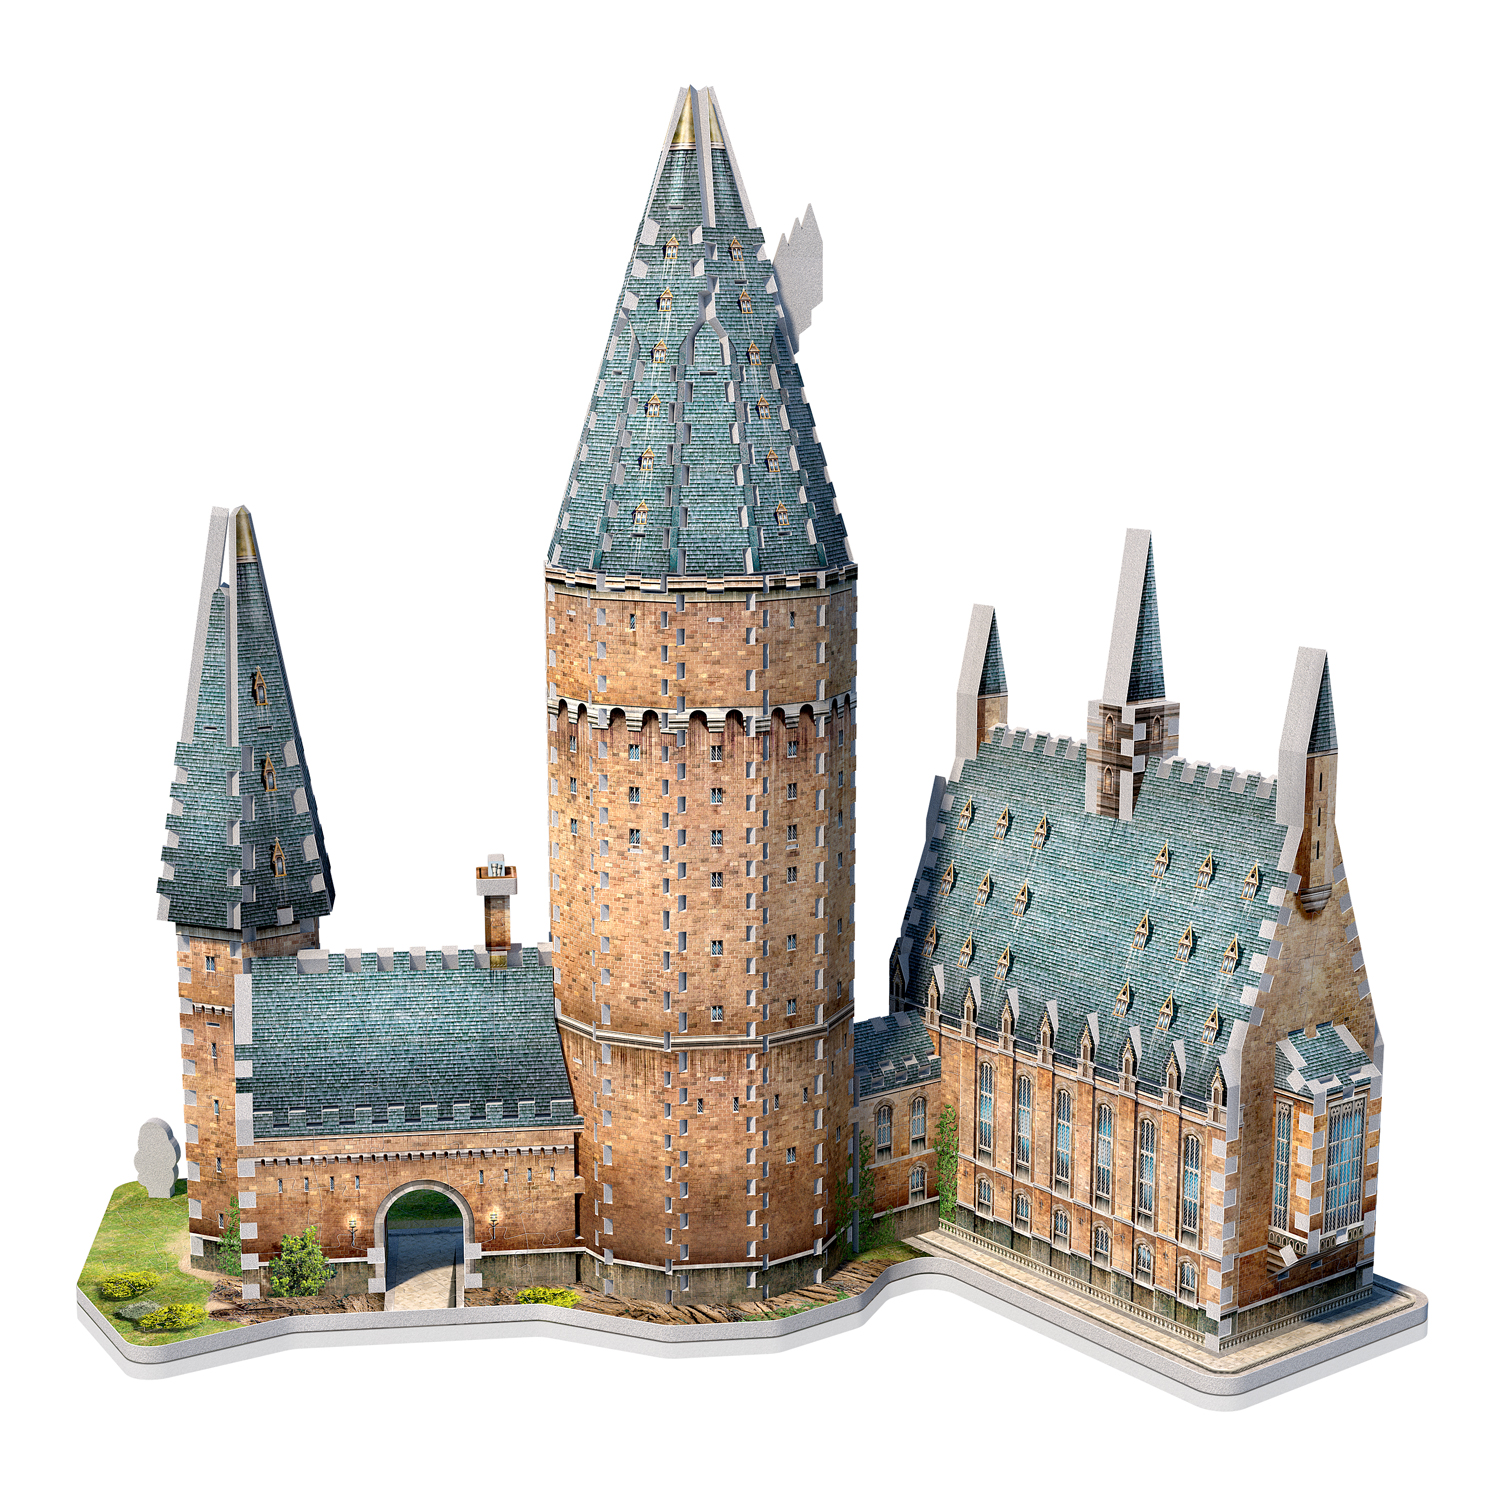 Game of Thrones & Castles Hogwarts Wrebbit 3D Jigsaw Puzzle Harry Potter 